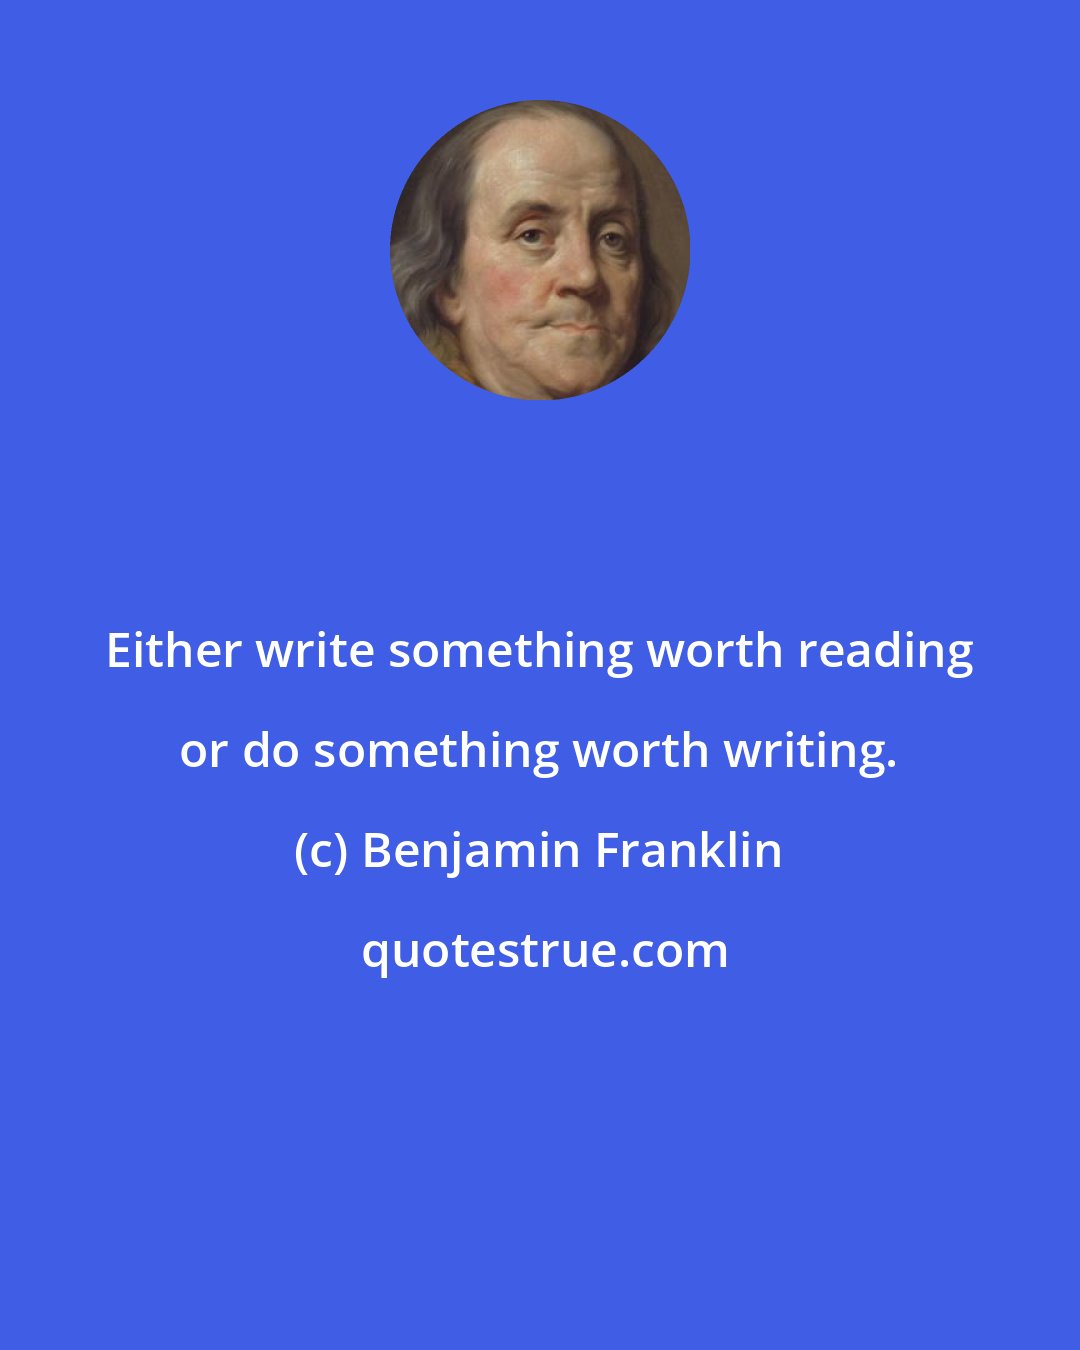 Benjamin Franklin: Either write something worth reading or do something worth writing.